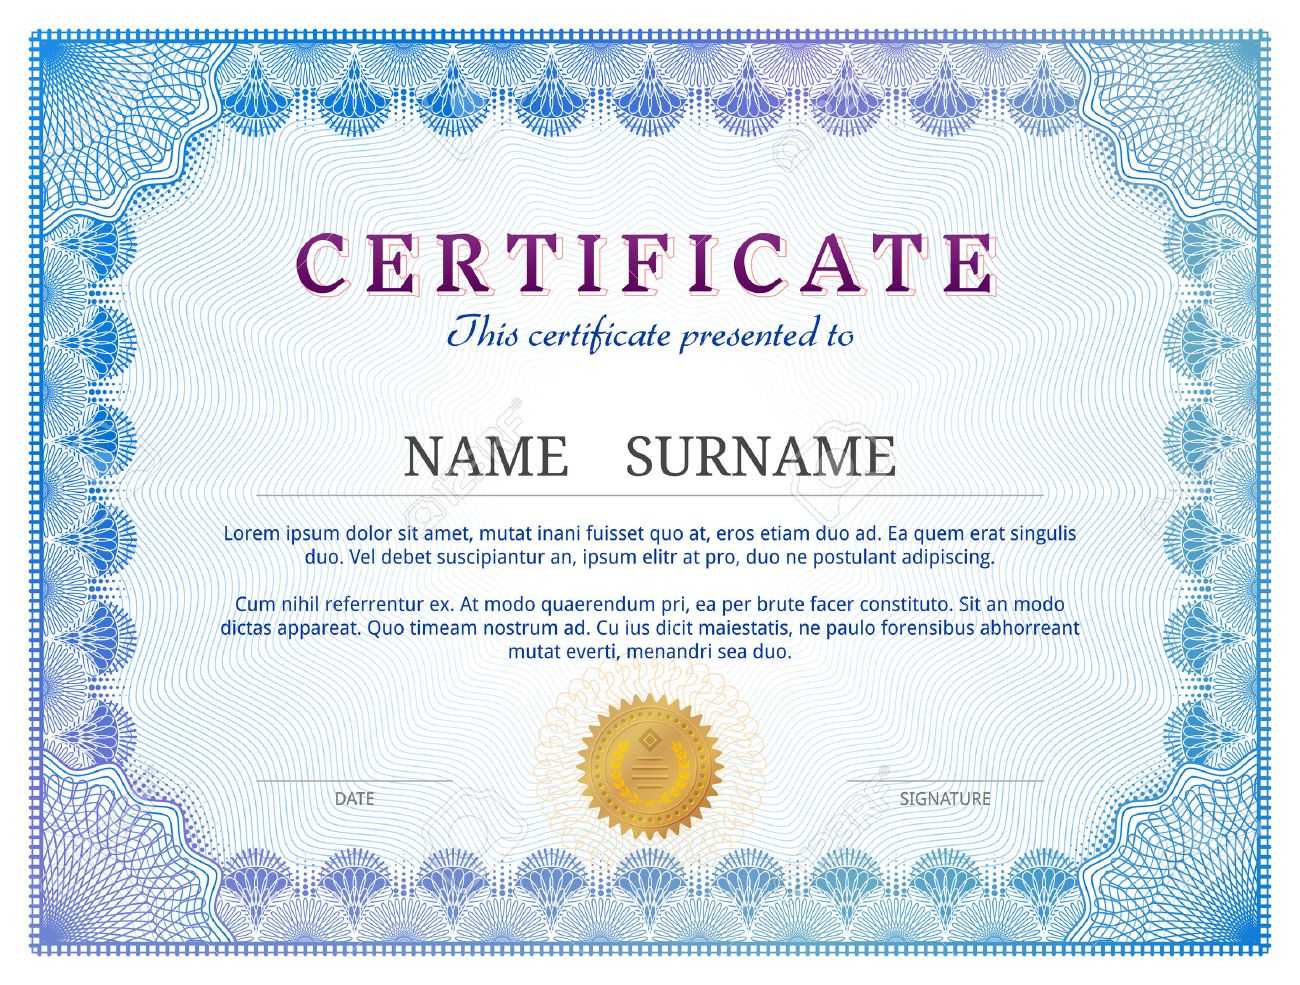 Certificate Template With Guilloche Elements. Blue Diploma Border.. With Validation Certificate Template